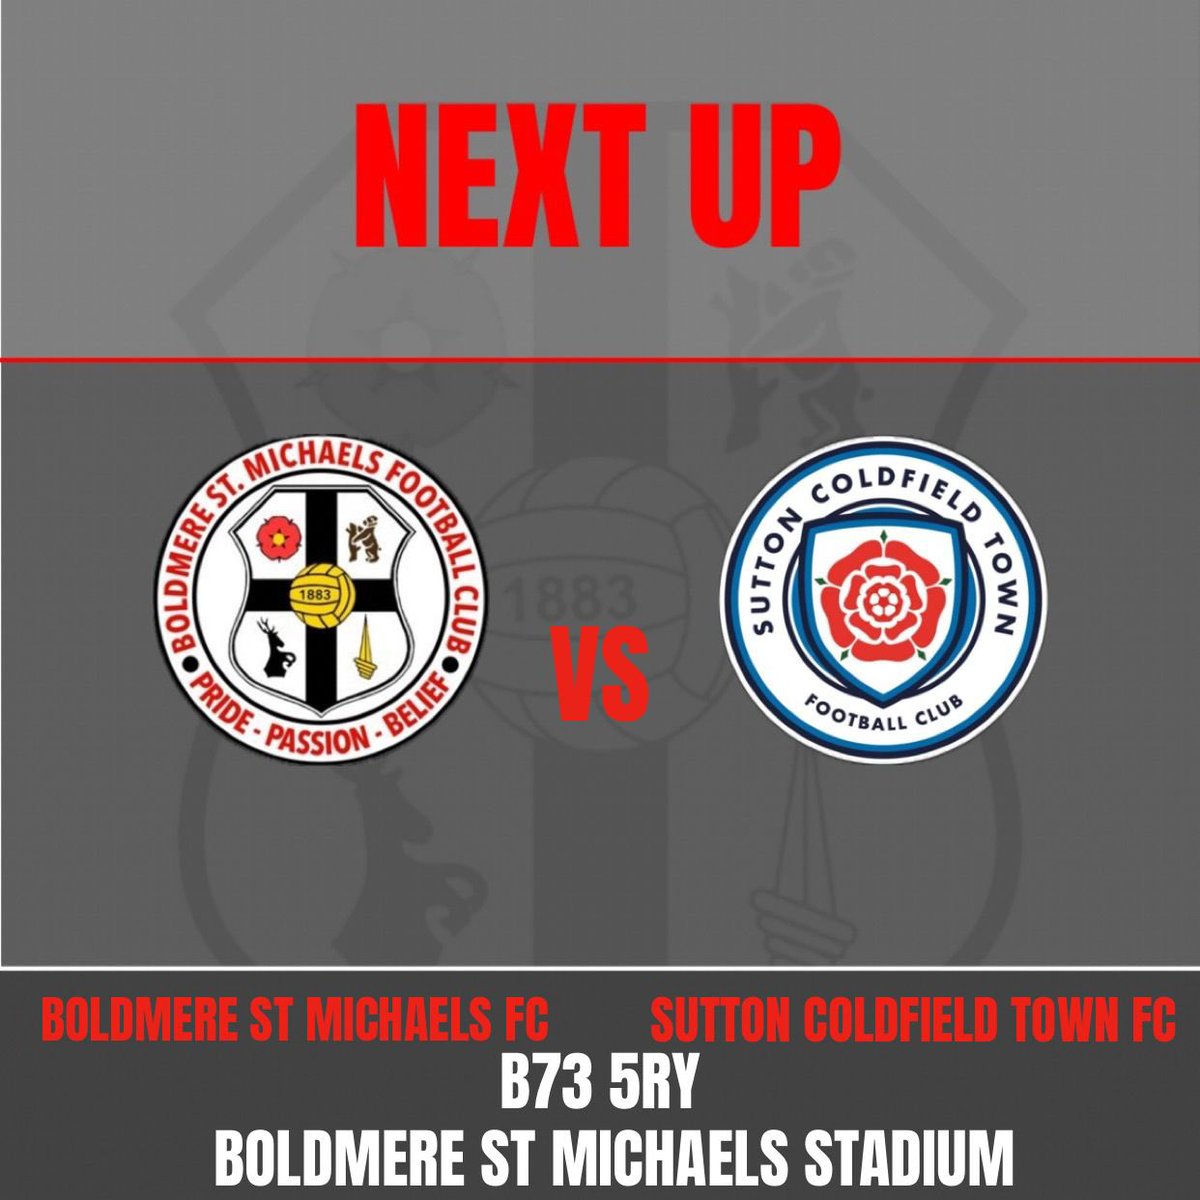 For the last time in the 23/24 season.

Boldmere St Michaels Women v Sutton Coldfield Town 

⏰2pm kick off 

🥳Family fun day from 12.30pm 

📍Boldmere Community Stadium 
B73 5RY

#upthemikes
#fawnl